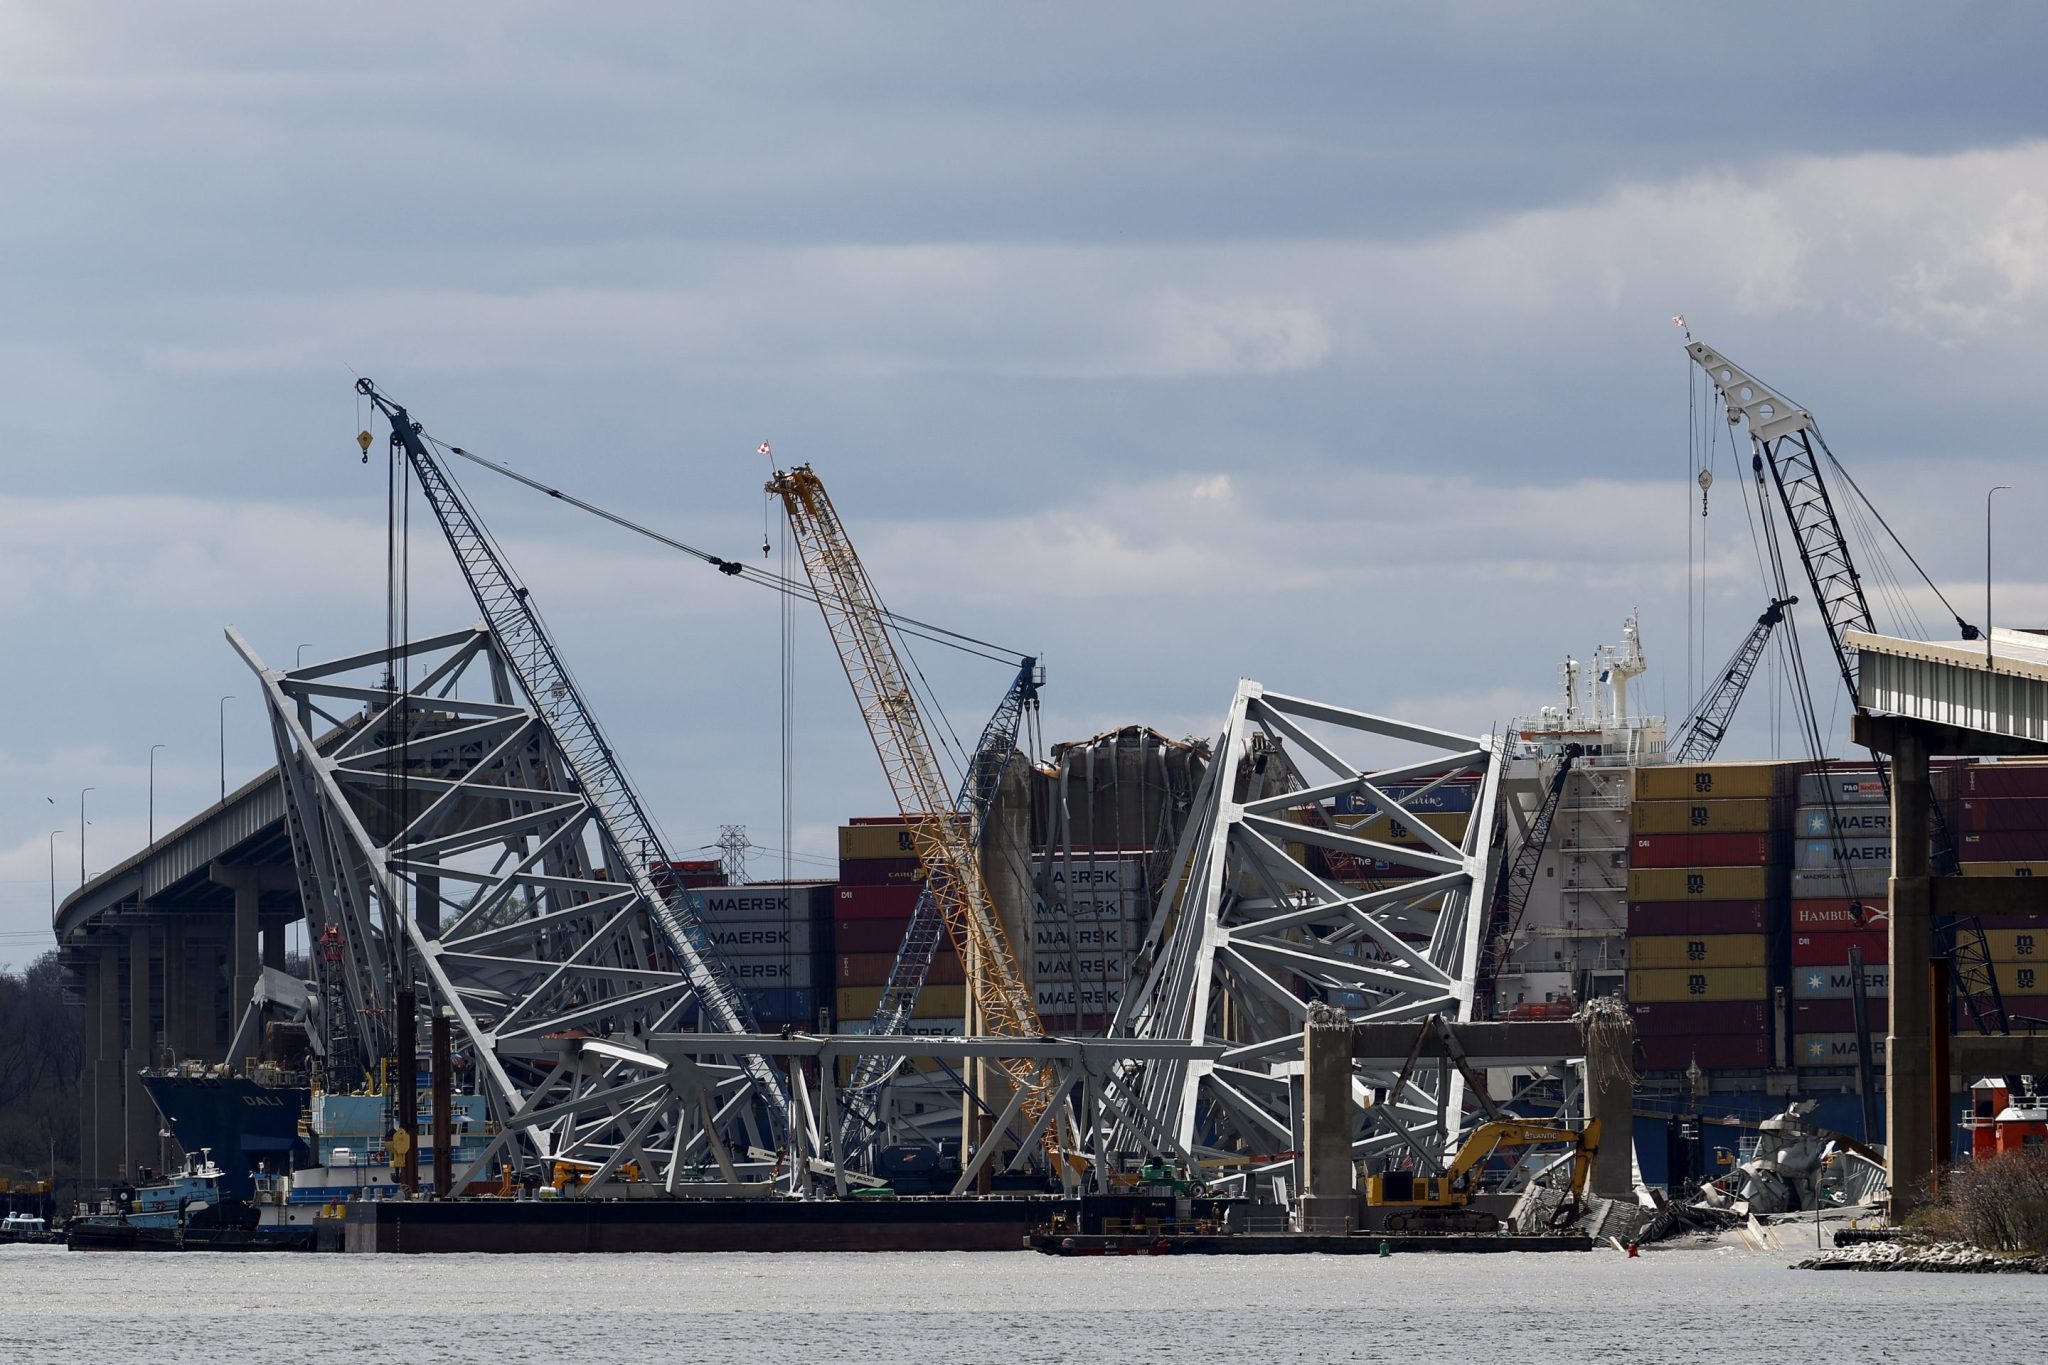 Baltimore salvage crews are removing containers from Dali cargo ship that collapsed the Francis Scott Key Bridge as harbor moves toward reopening